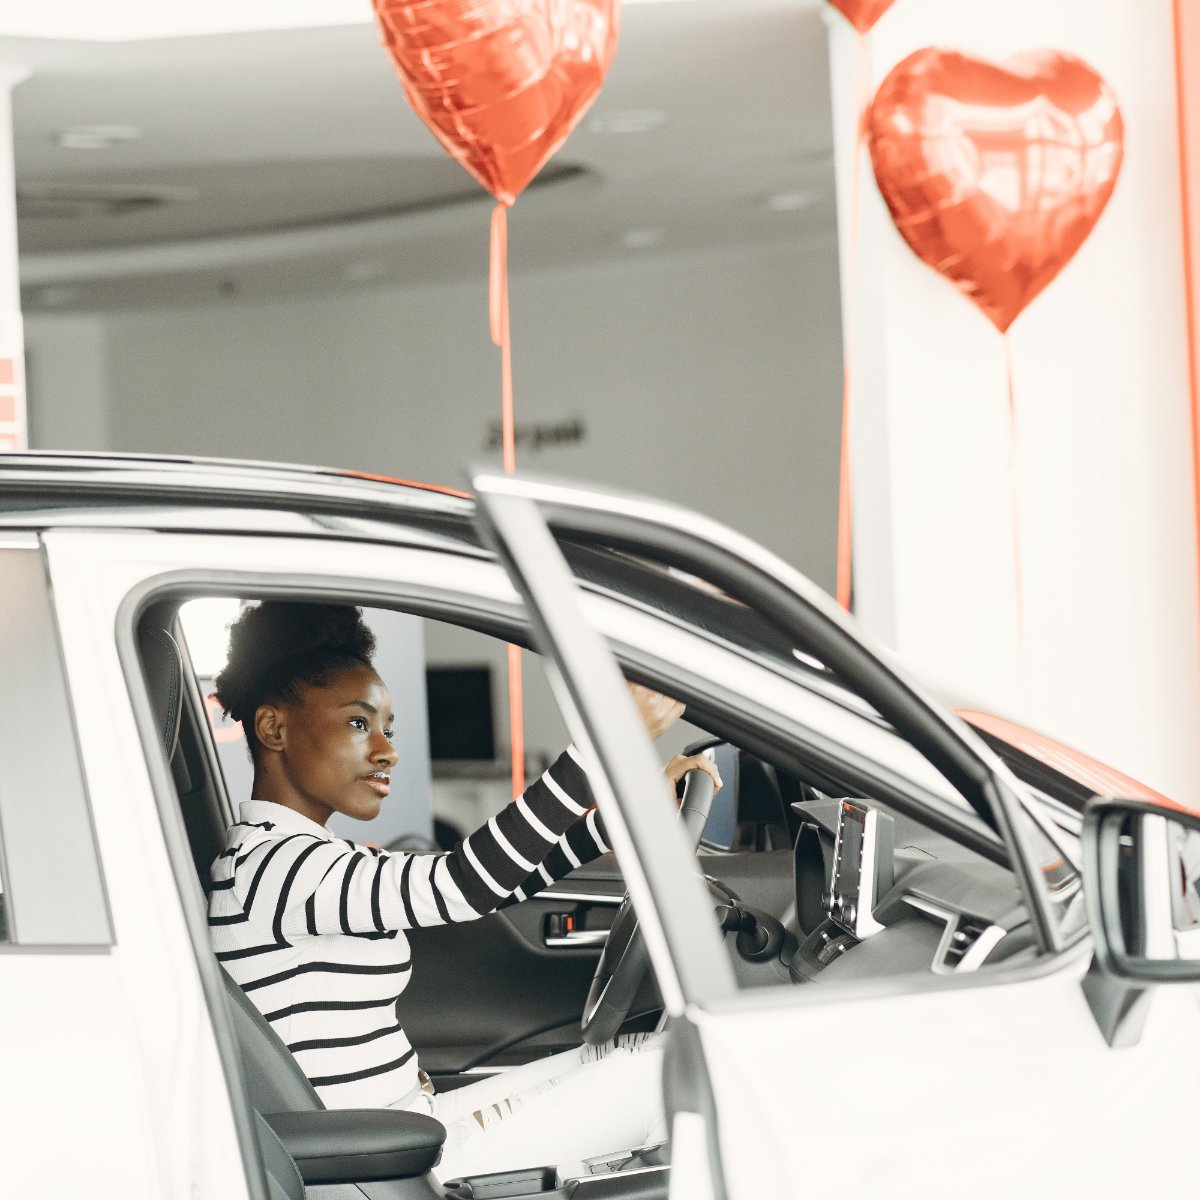 Show you car some love by stopping in whenever it needs anything from a tune-up to a tire rotation. #SterlingAutomotive #MomAndPopShop #MaintenanceService #BrakingService #EngineService #OilChanges #Repairs